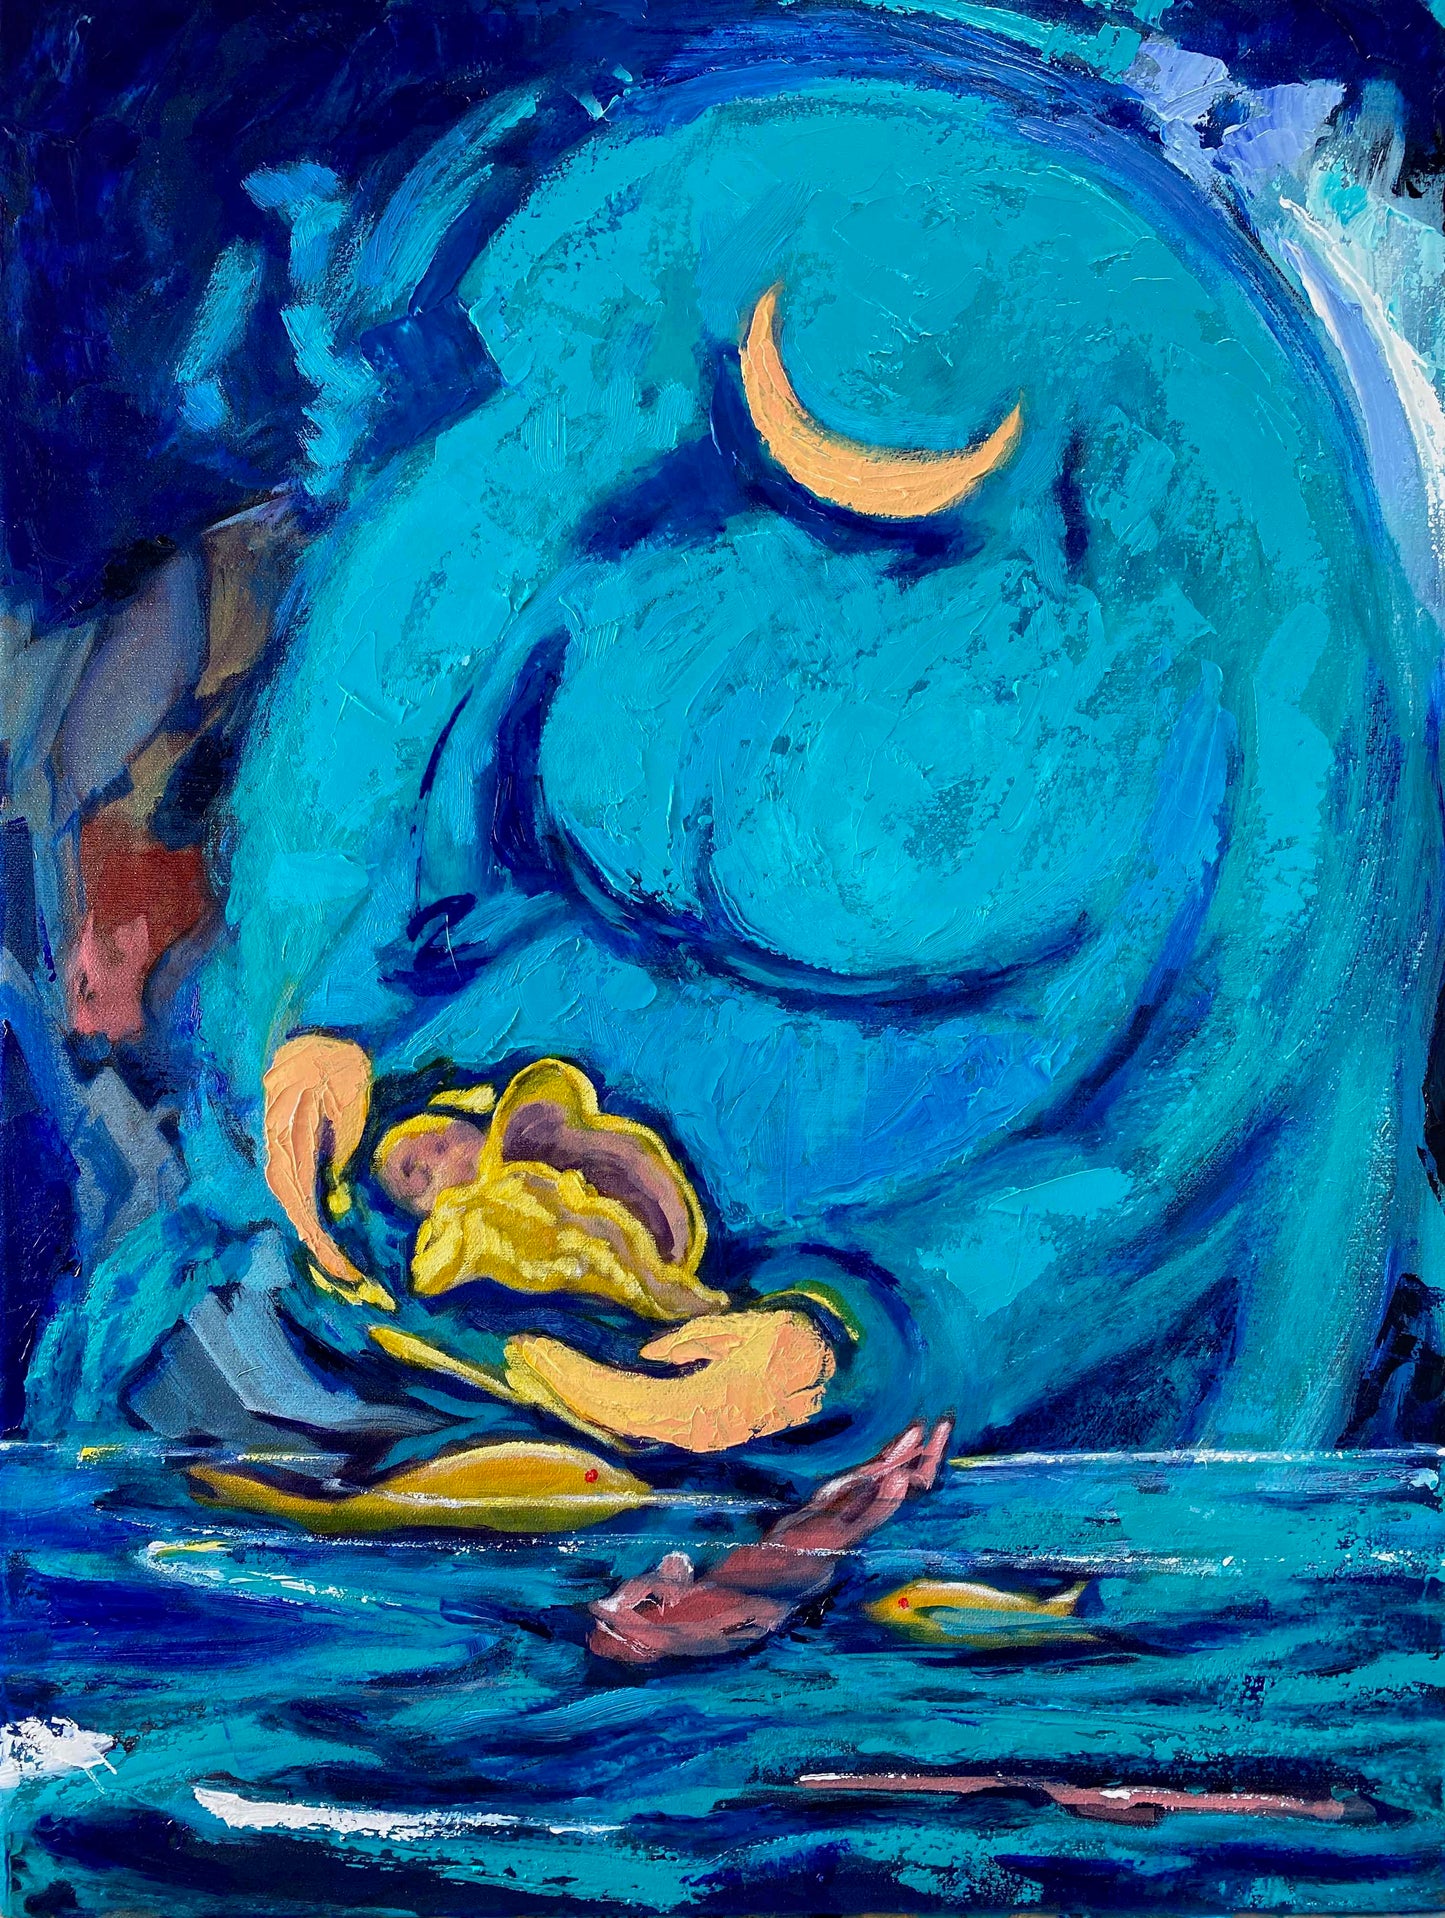 Print "Sacred Feminine Print by Marilyn Wells from Oil Painting "Compassion - Mercy 1" original oil on Canvas.